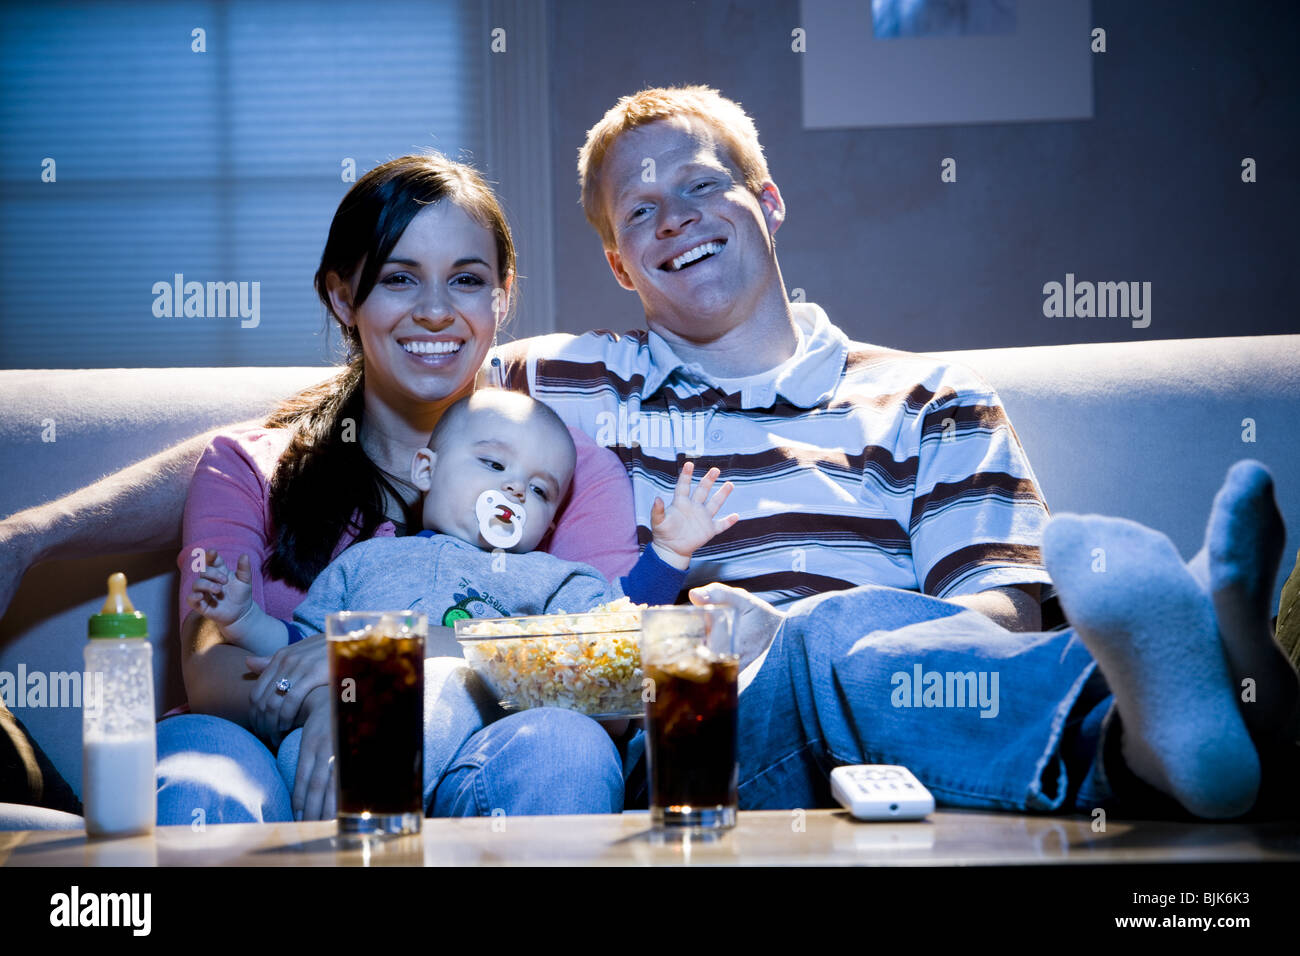 Man on sofa with woman feeding baby and bowl of popcorn smiling Stock Photo